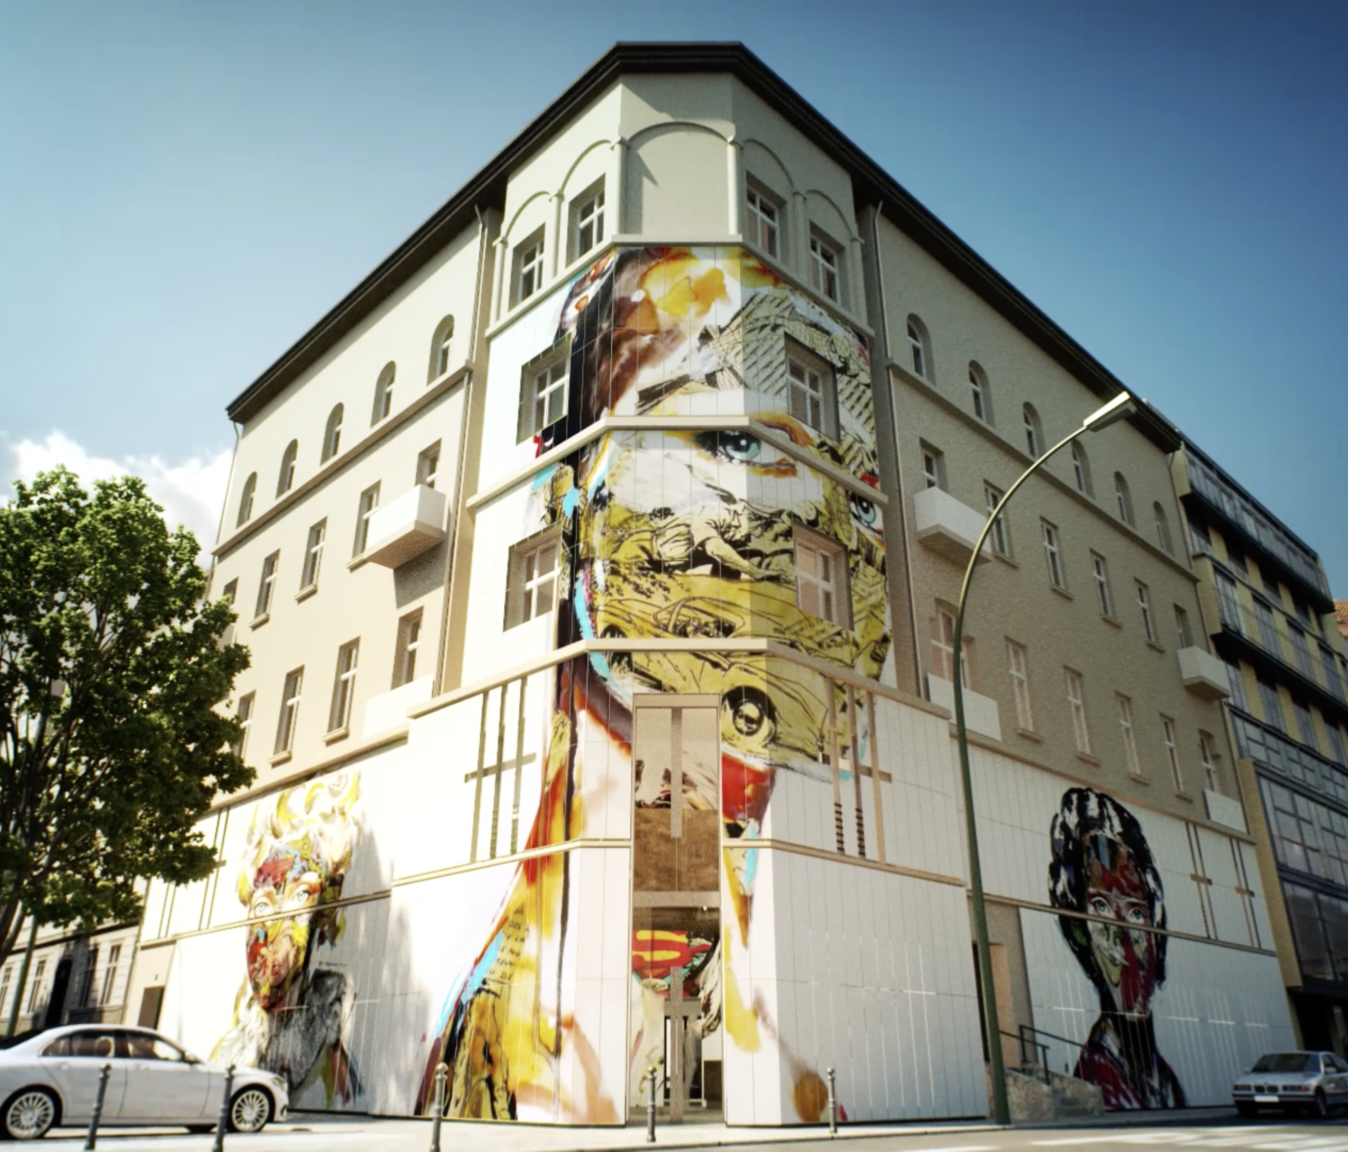 The façade of the building will offer murals in an effort to keep street and urban art outside.